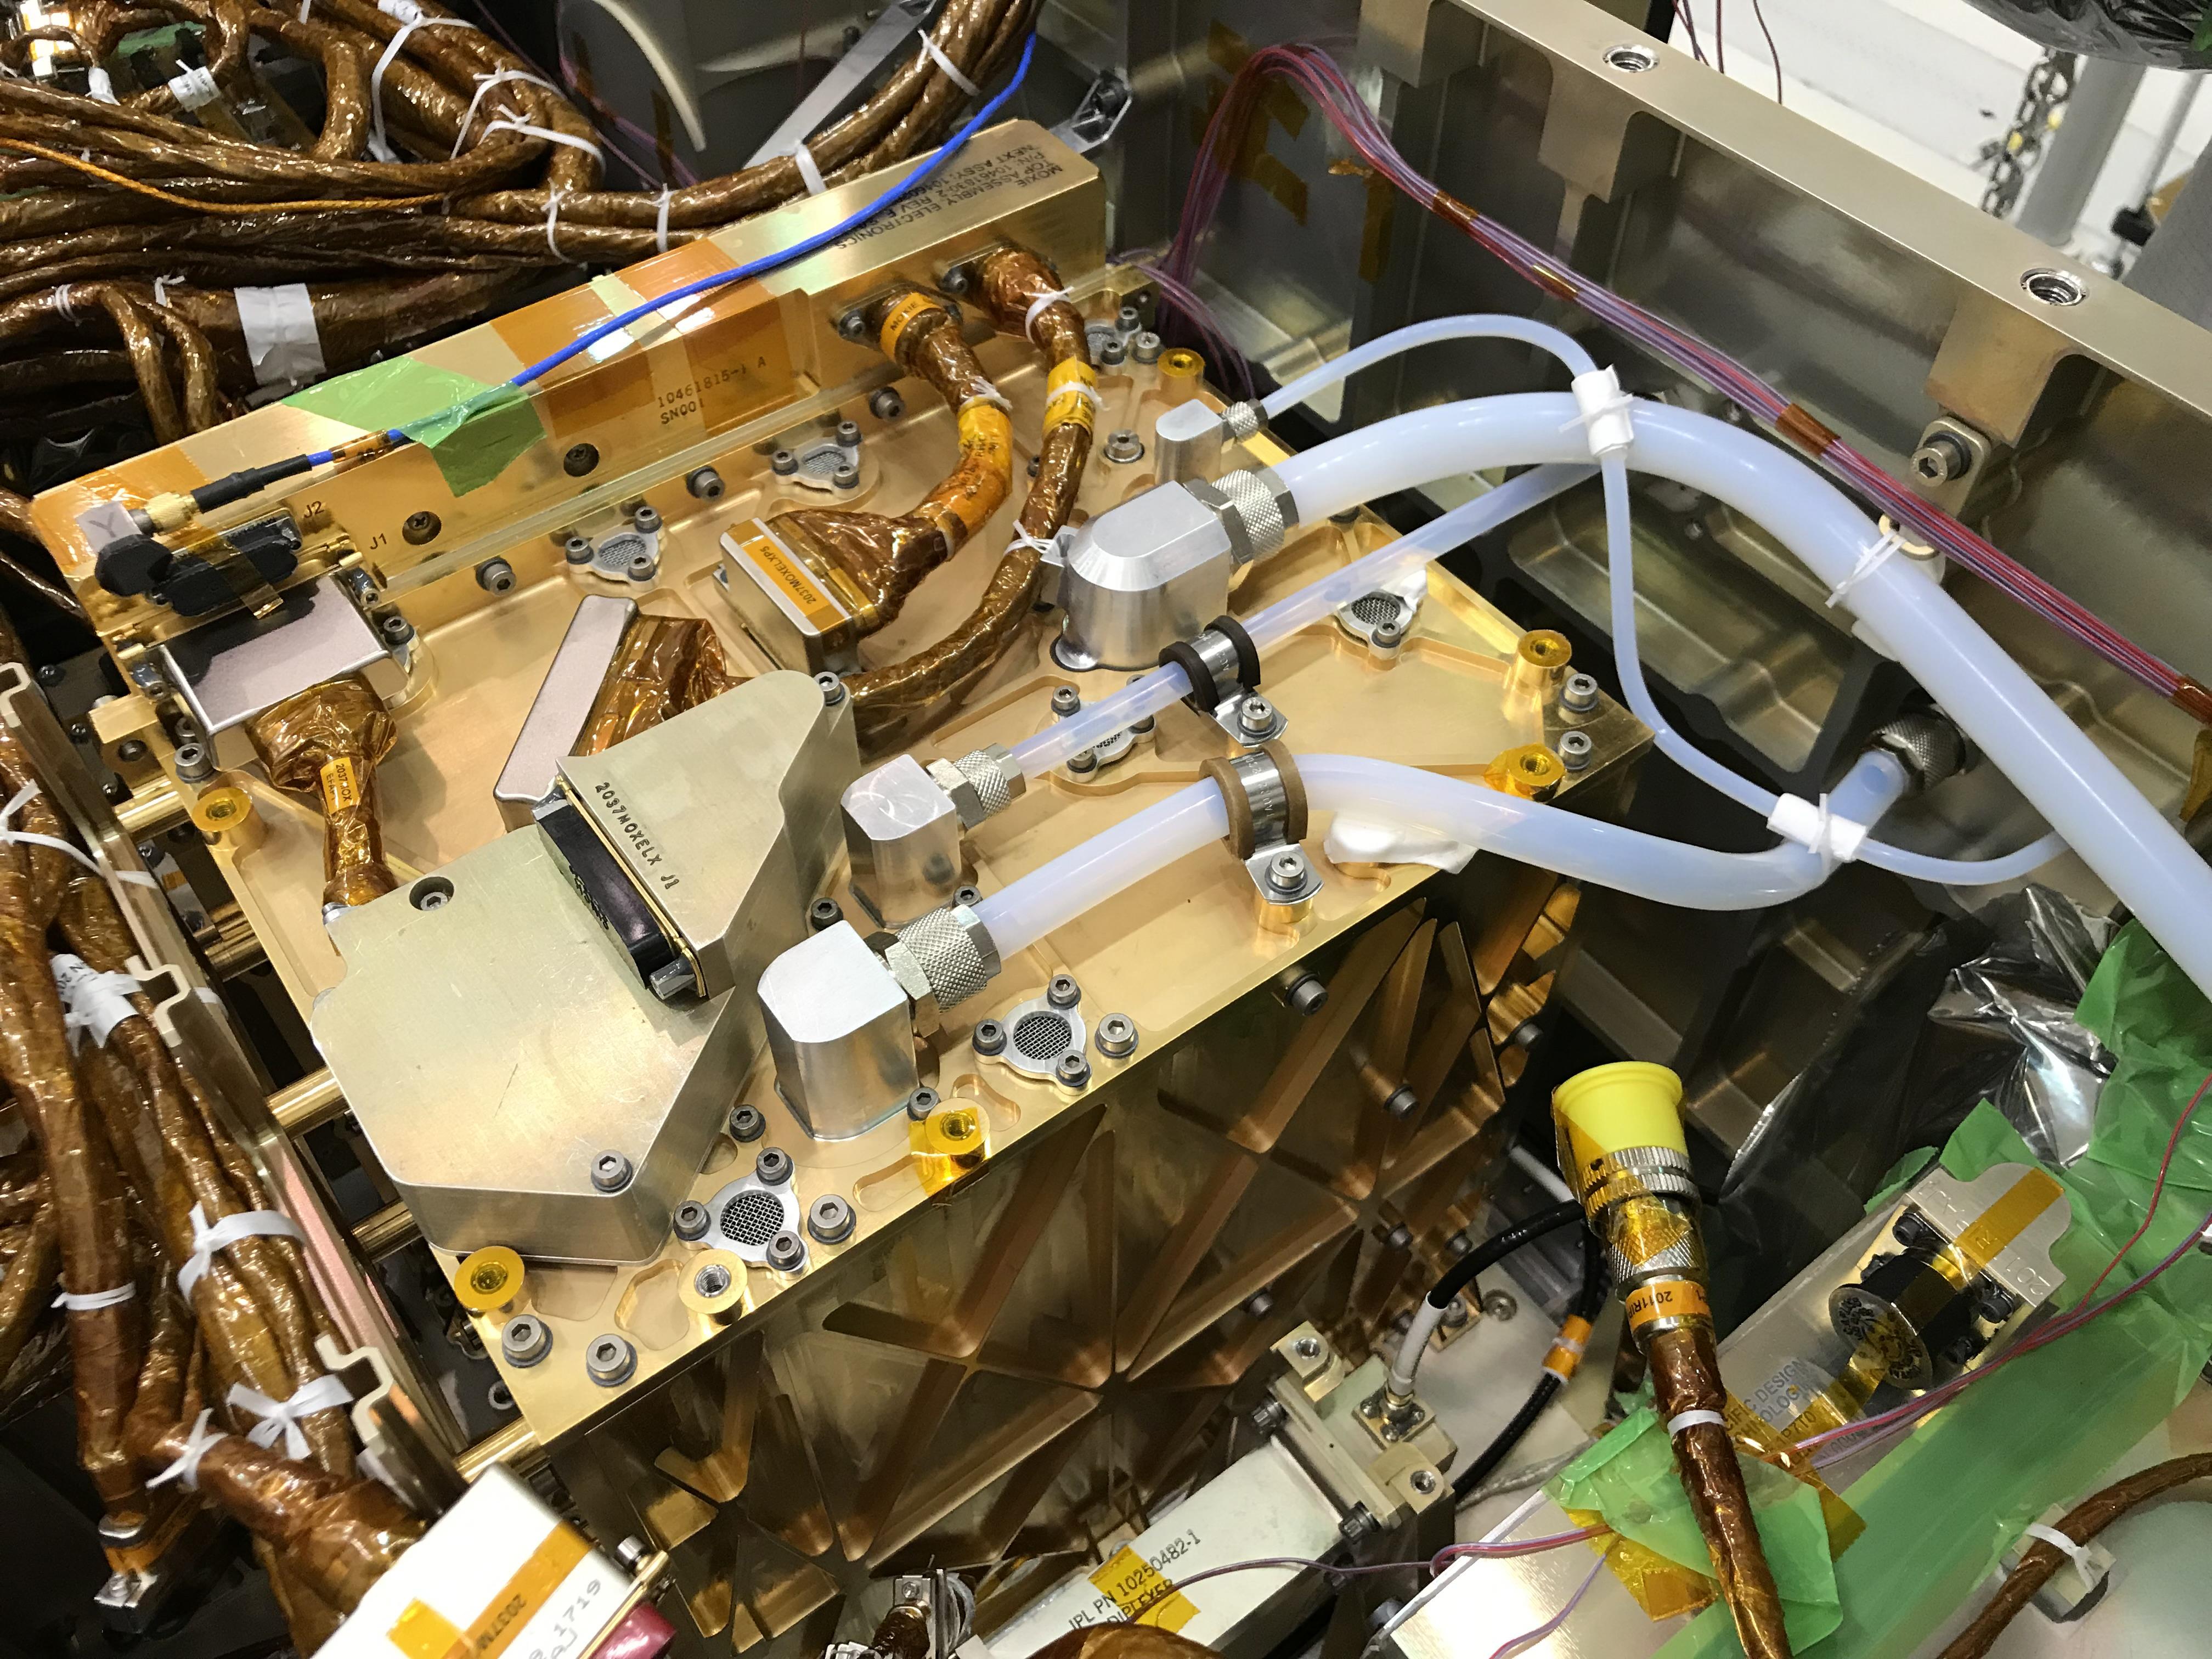 Inside the Perseverance Mars rover, the gold-plated Mars Oxygen In-Situ Resource Utilization Experiment (MOXIE) huffed and puffed, producing sounds detected by the SuperCam-mounted microphone.